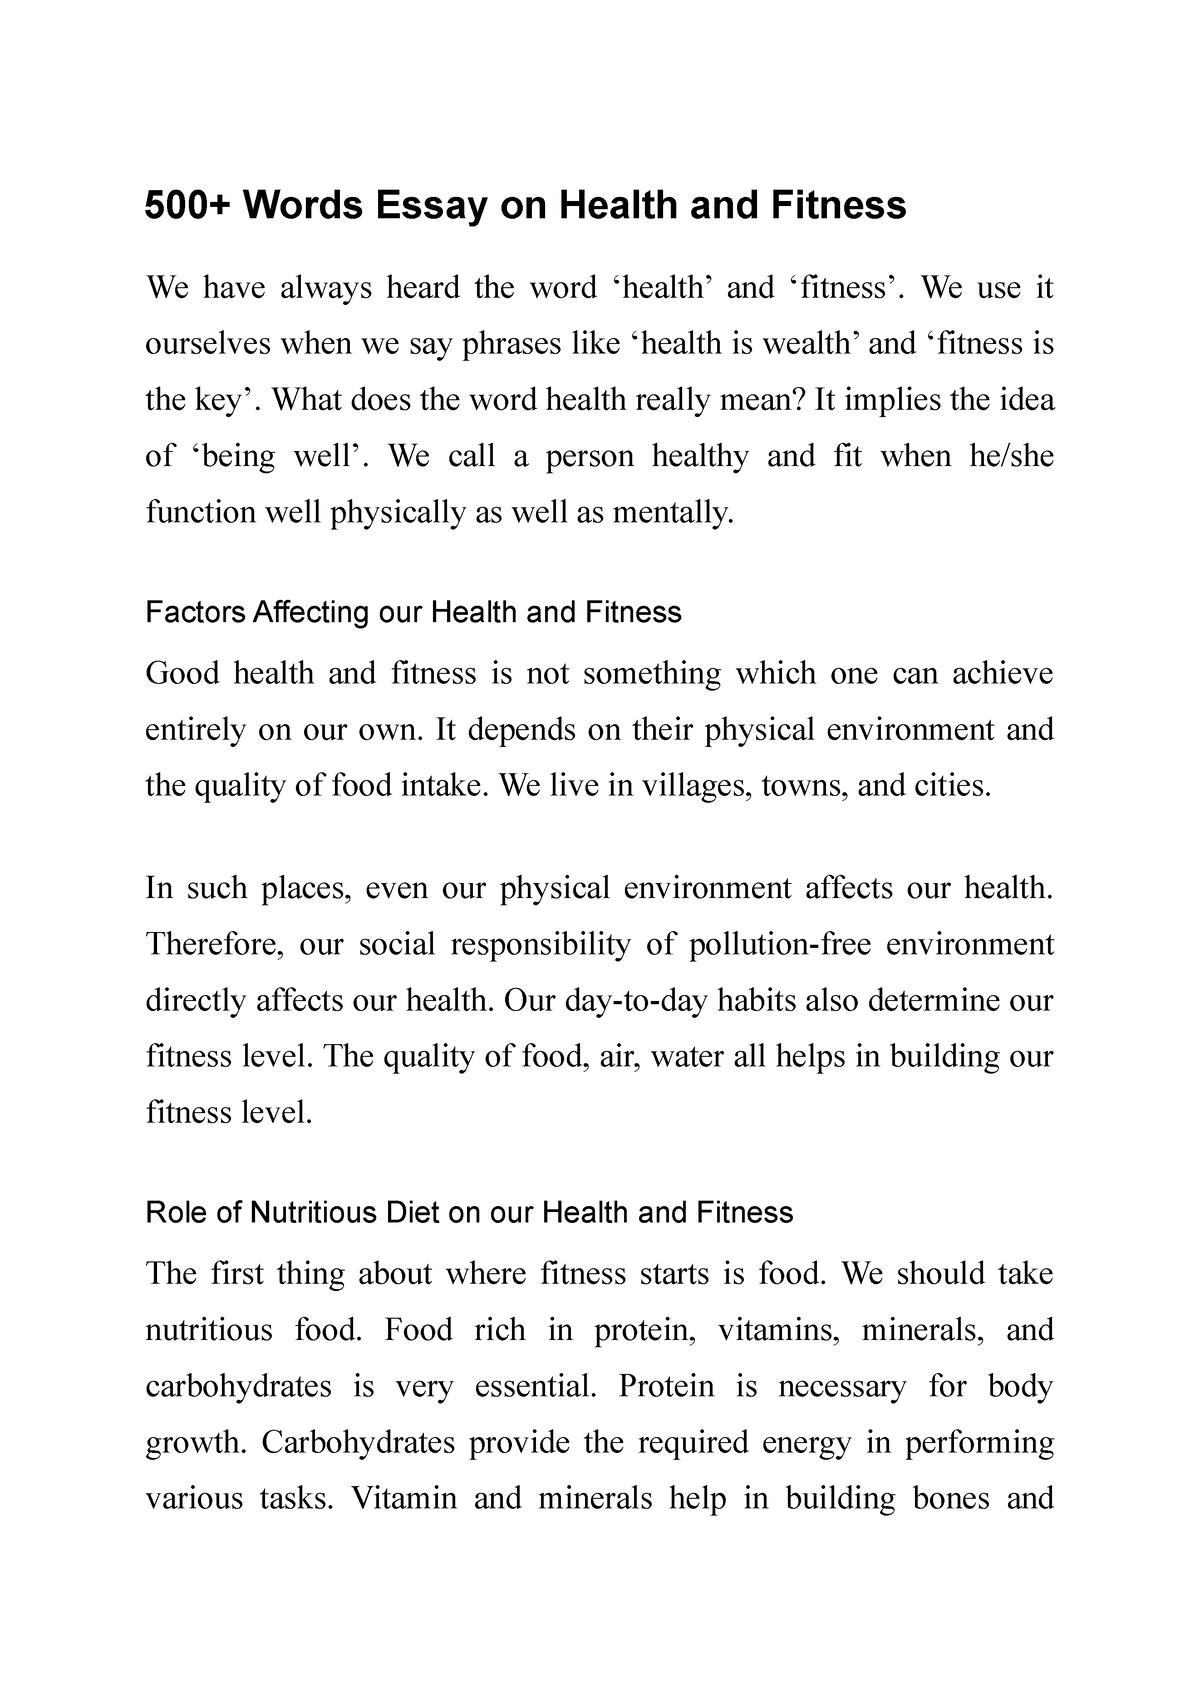 essay on health and fitness in 500 words